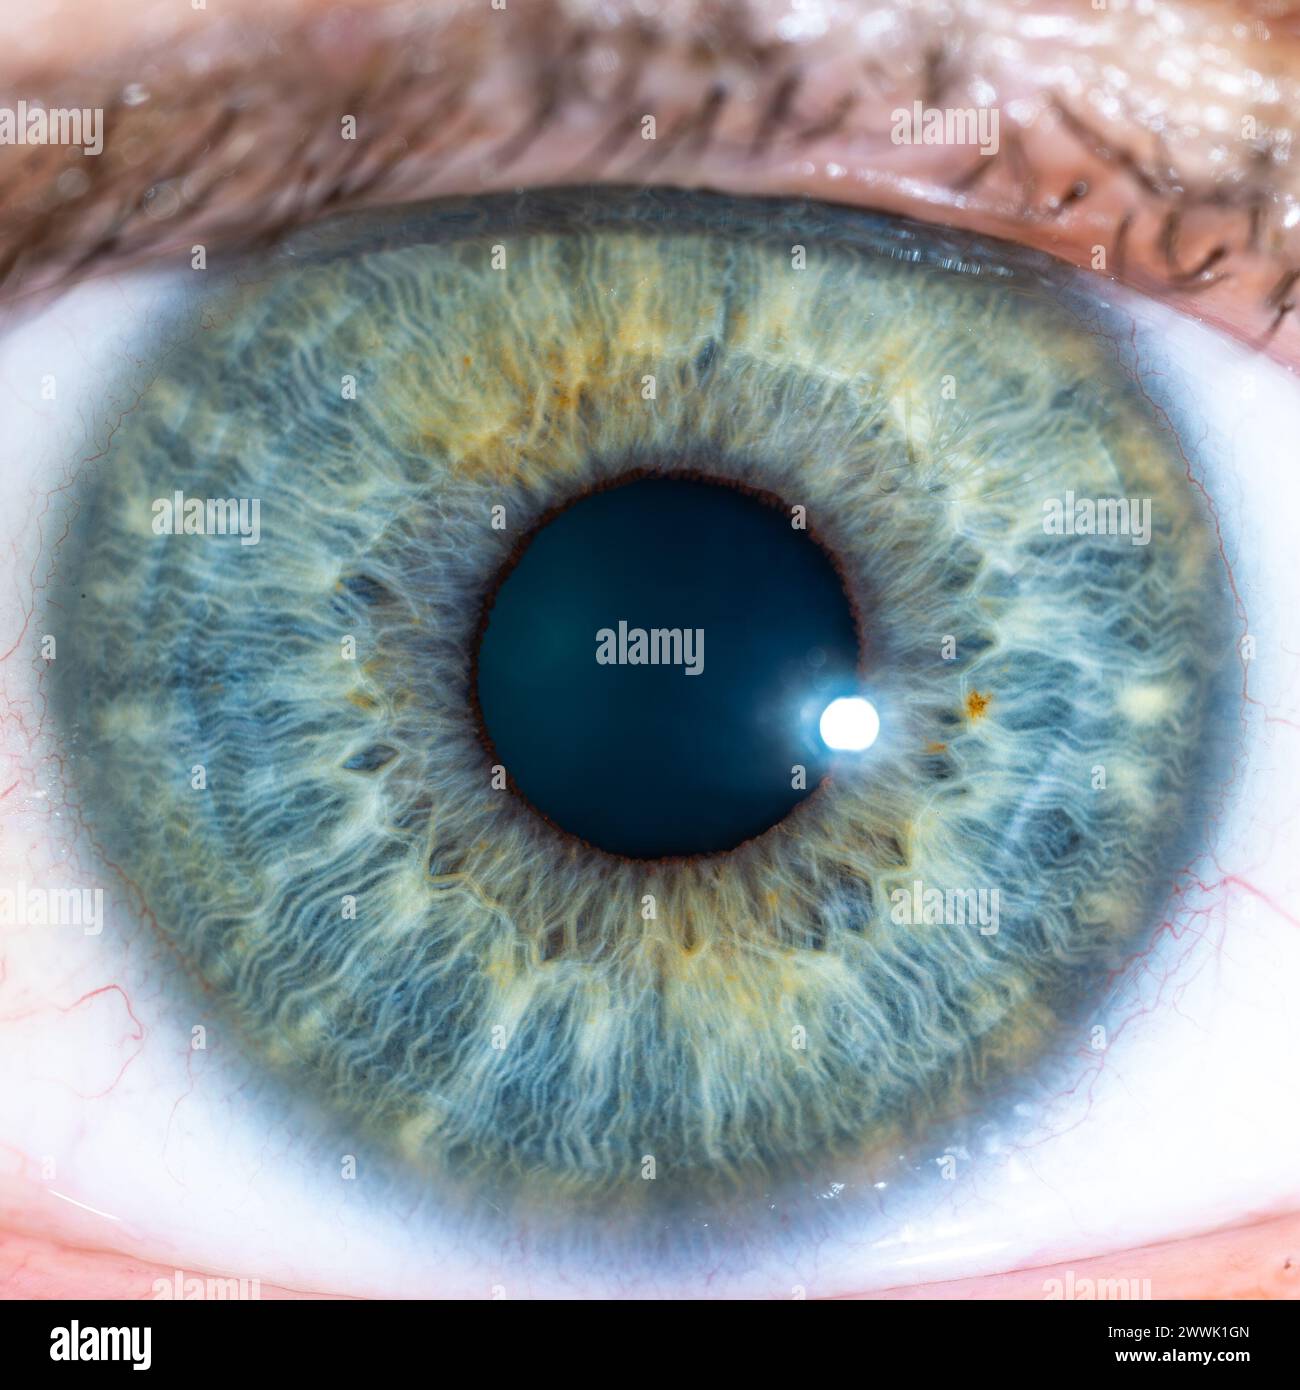 Description: High Resolution male Green-Blue Colored Eye with Yellow Pigment Spots and Pupil Wide Open. Close Up. Structural Anatomy. Human Iris. Macr Stock Photo